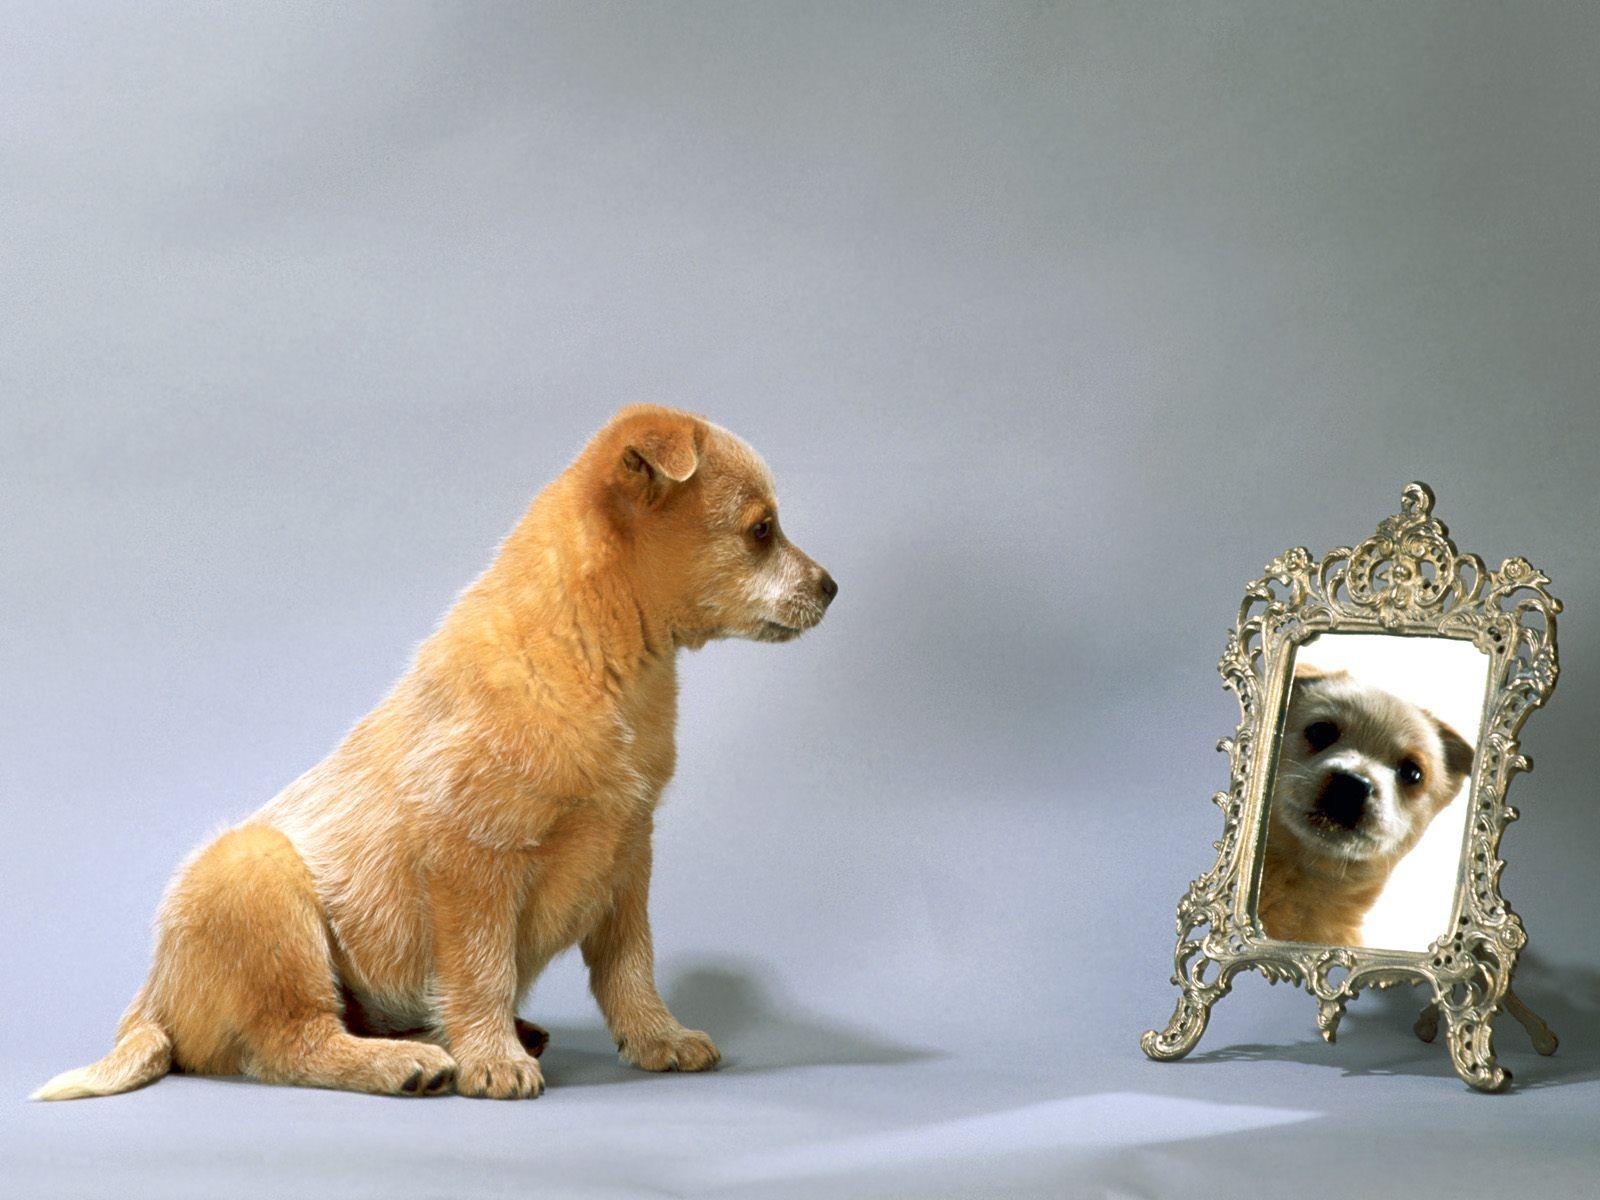 A Dog in front of Mirror Dog Wallpaper Background. Dogs